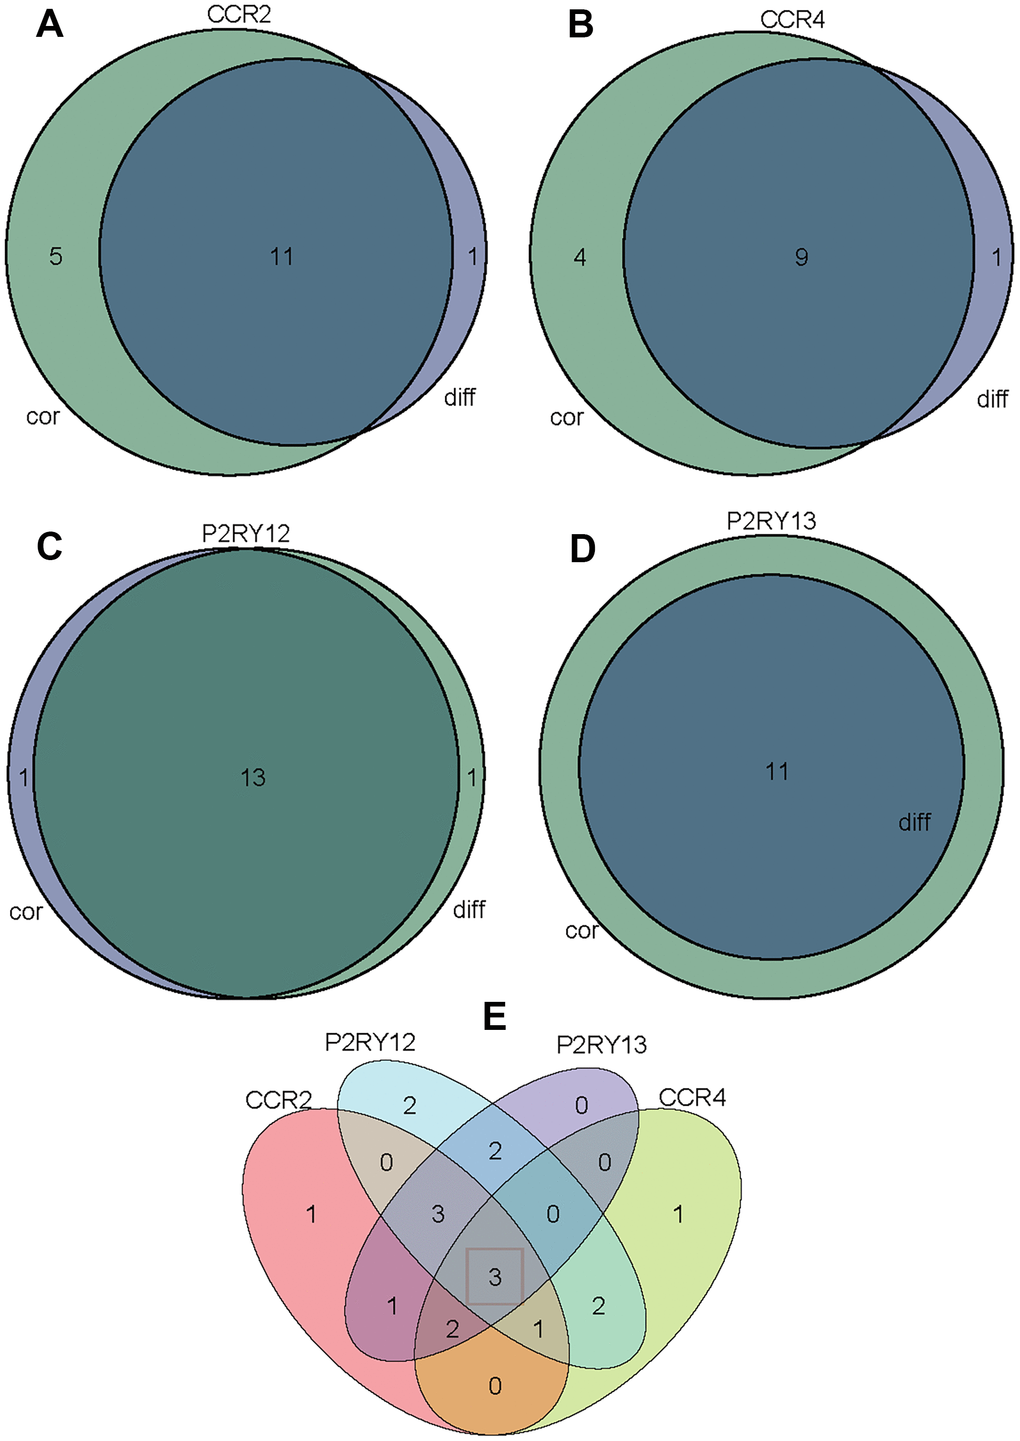 Venn diagram analysis of aberrantly TIICs based on the difference analysis method and correlation analysis method. (A) Venn diagram indicating 11 kinds of TIICs correlated with CCR2 expression co-determined by difference and correlation analysis displayed in violin and scatter plots, respectively. (B) Venn diagram indicating 9 kinds of TIICs correlated with CCR4 expression co-determined by difference and correlation analysis displayed in violin and scatter plots, respectively. (C) Venn diagram indicating 13 kinds of TIICs correlated with P2RY12 expression co-determined by difference and correlation analysis displayed in violin and scatter plots, respectively. (D) Venn diagram indicating 11 kinds of TIICs correlated with P2RY13 expression co-determined by difference and correlation analysis displayed in violin and scatter plots, respectively. (E) Venn diagram indicating 3 kinds of TIICs that were co-related by these four genes.